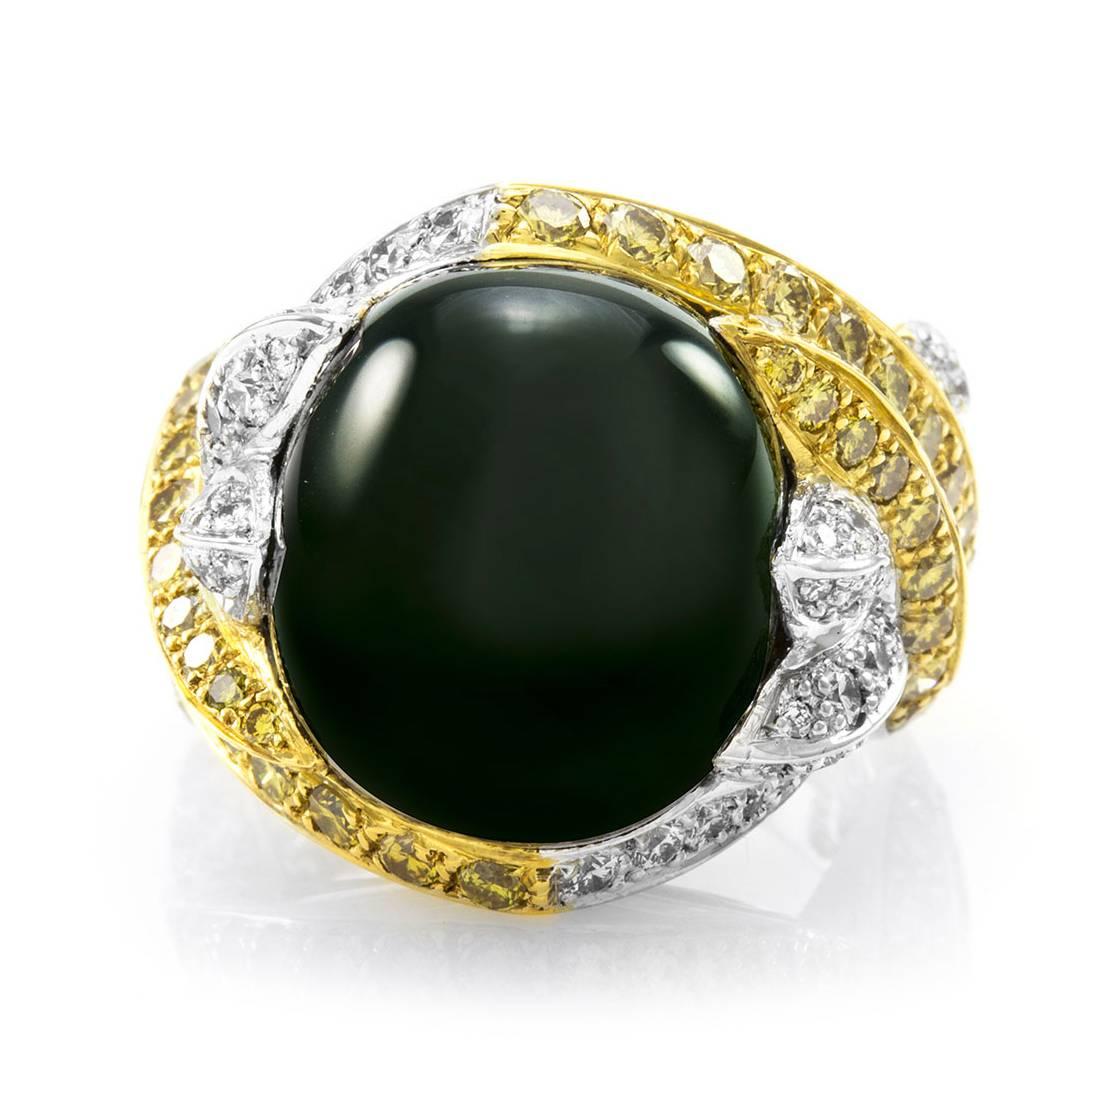 Green tourmaline bypass ring with yellow and white pavé diamonds set in 18K gold. There are one oval tourmaline cabochon (15.02ct), sixty-six yellow round brilliant cut diamonds (1.70ctw), and sixty-nine white round brilliant cut diamonds (0.95ctw)